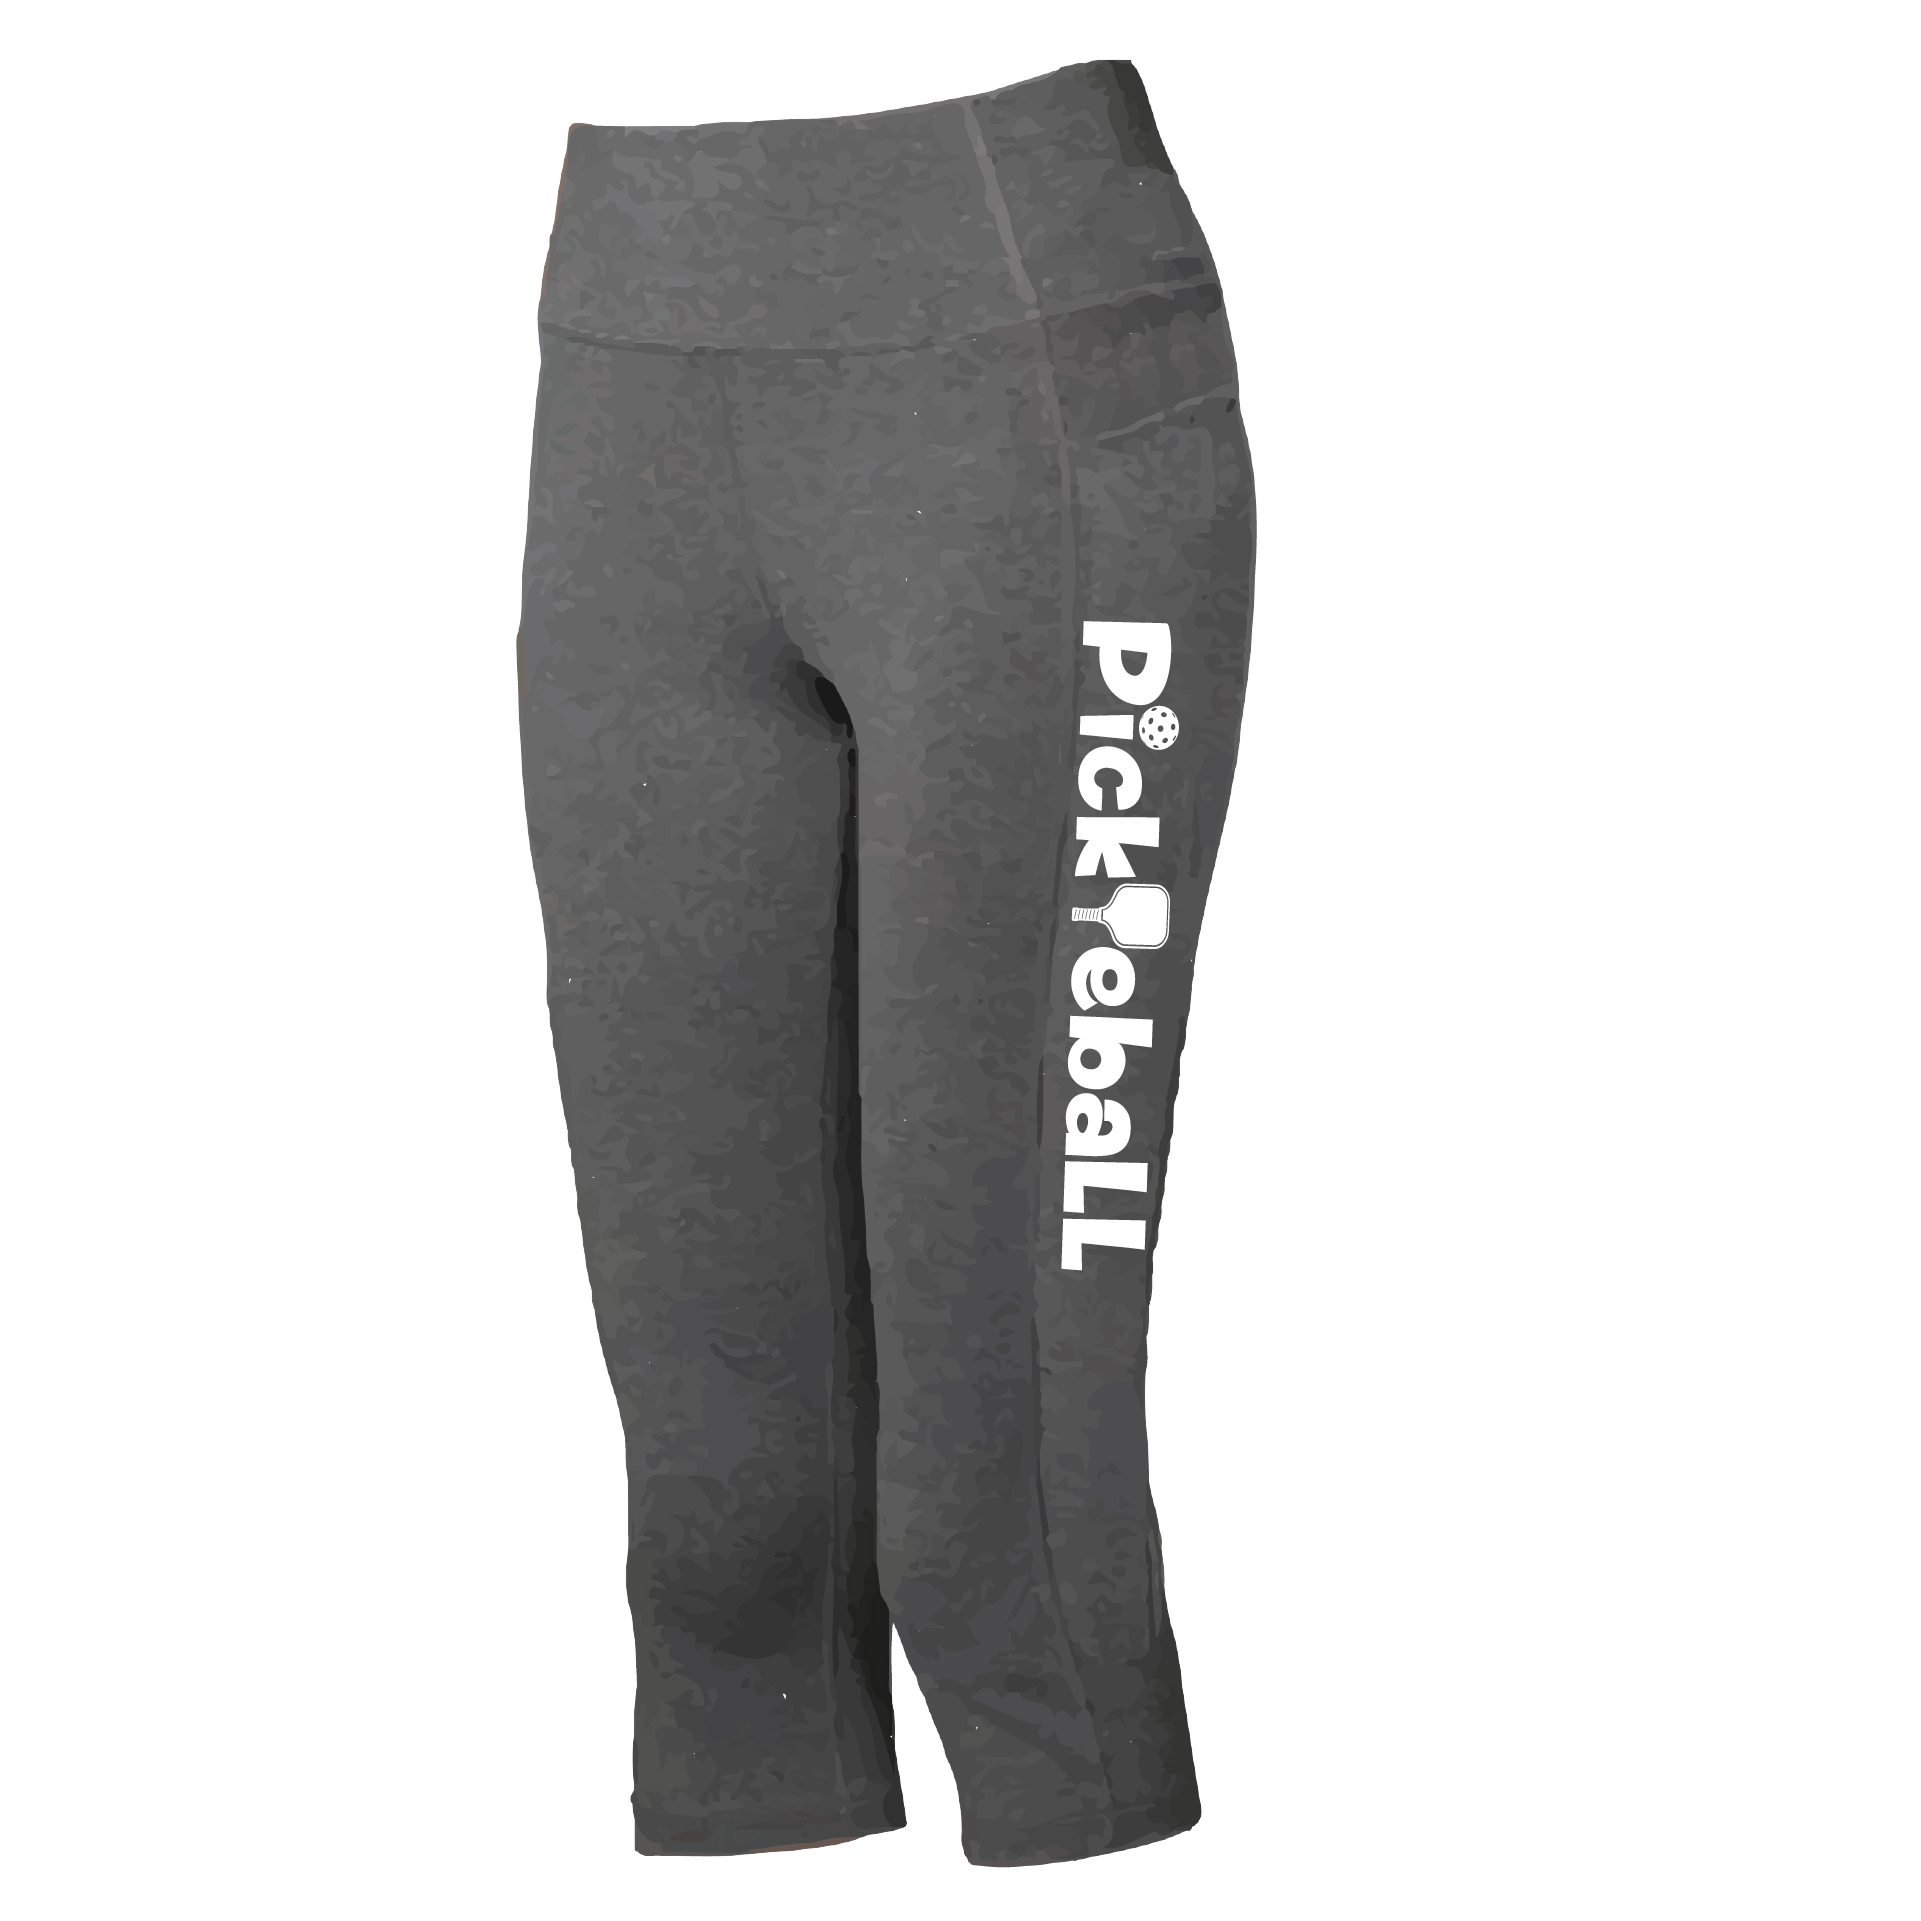 Performance Creator Collection Grey Tights & Leggings.